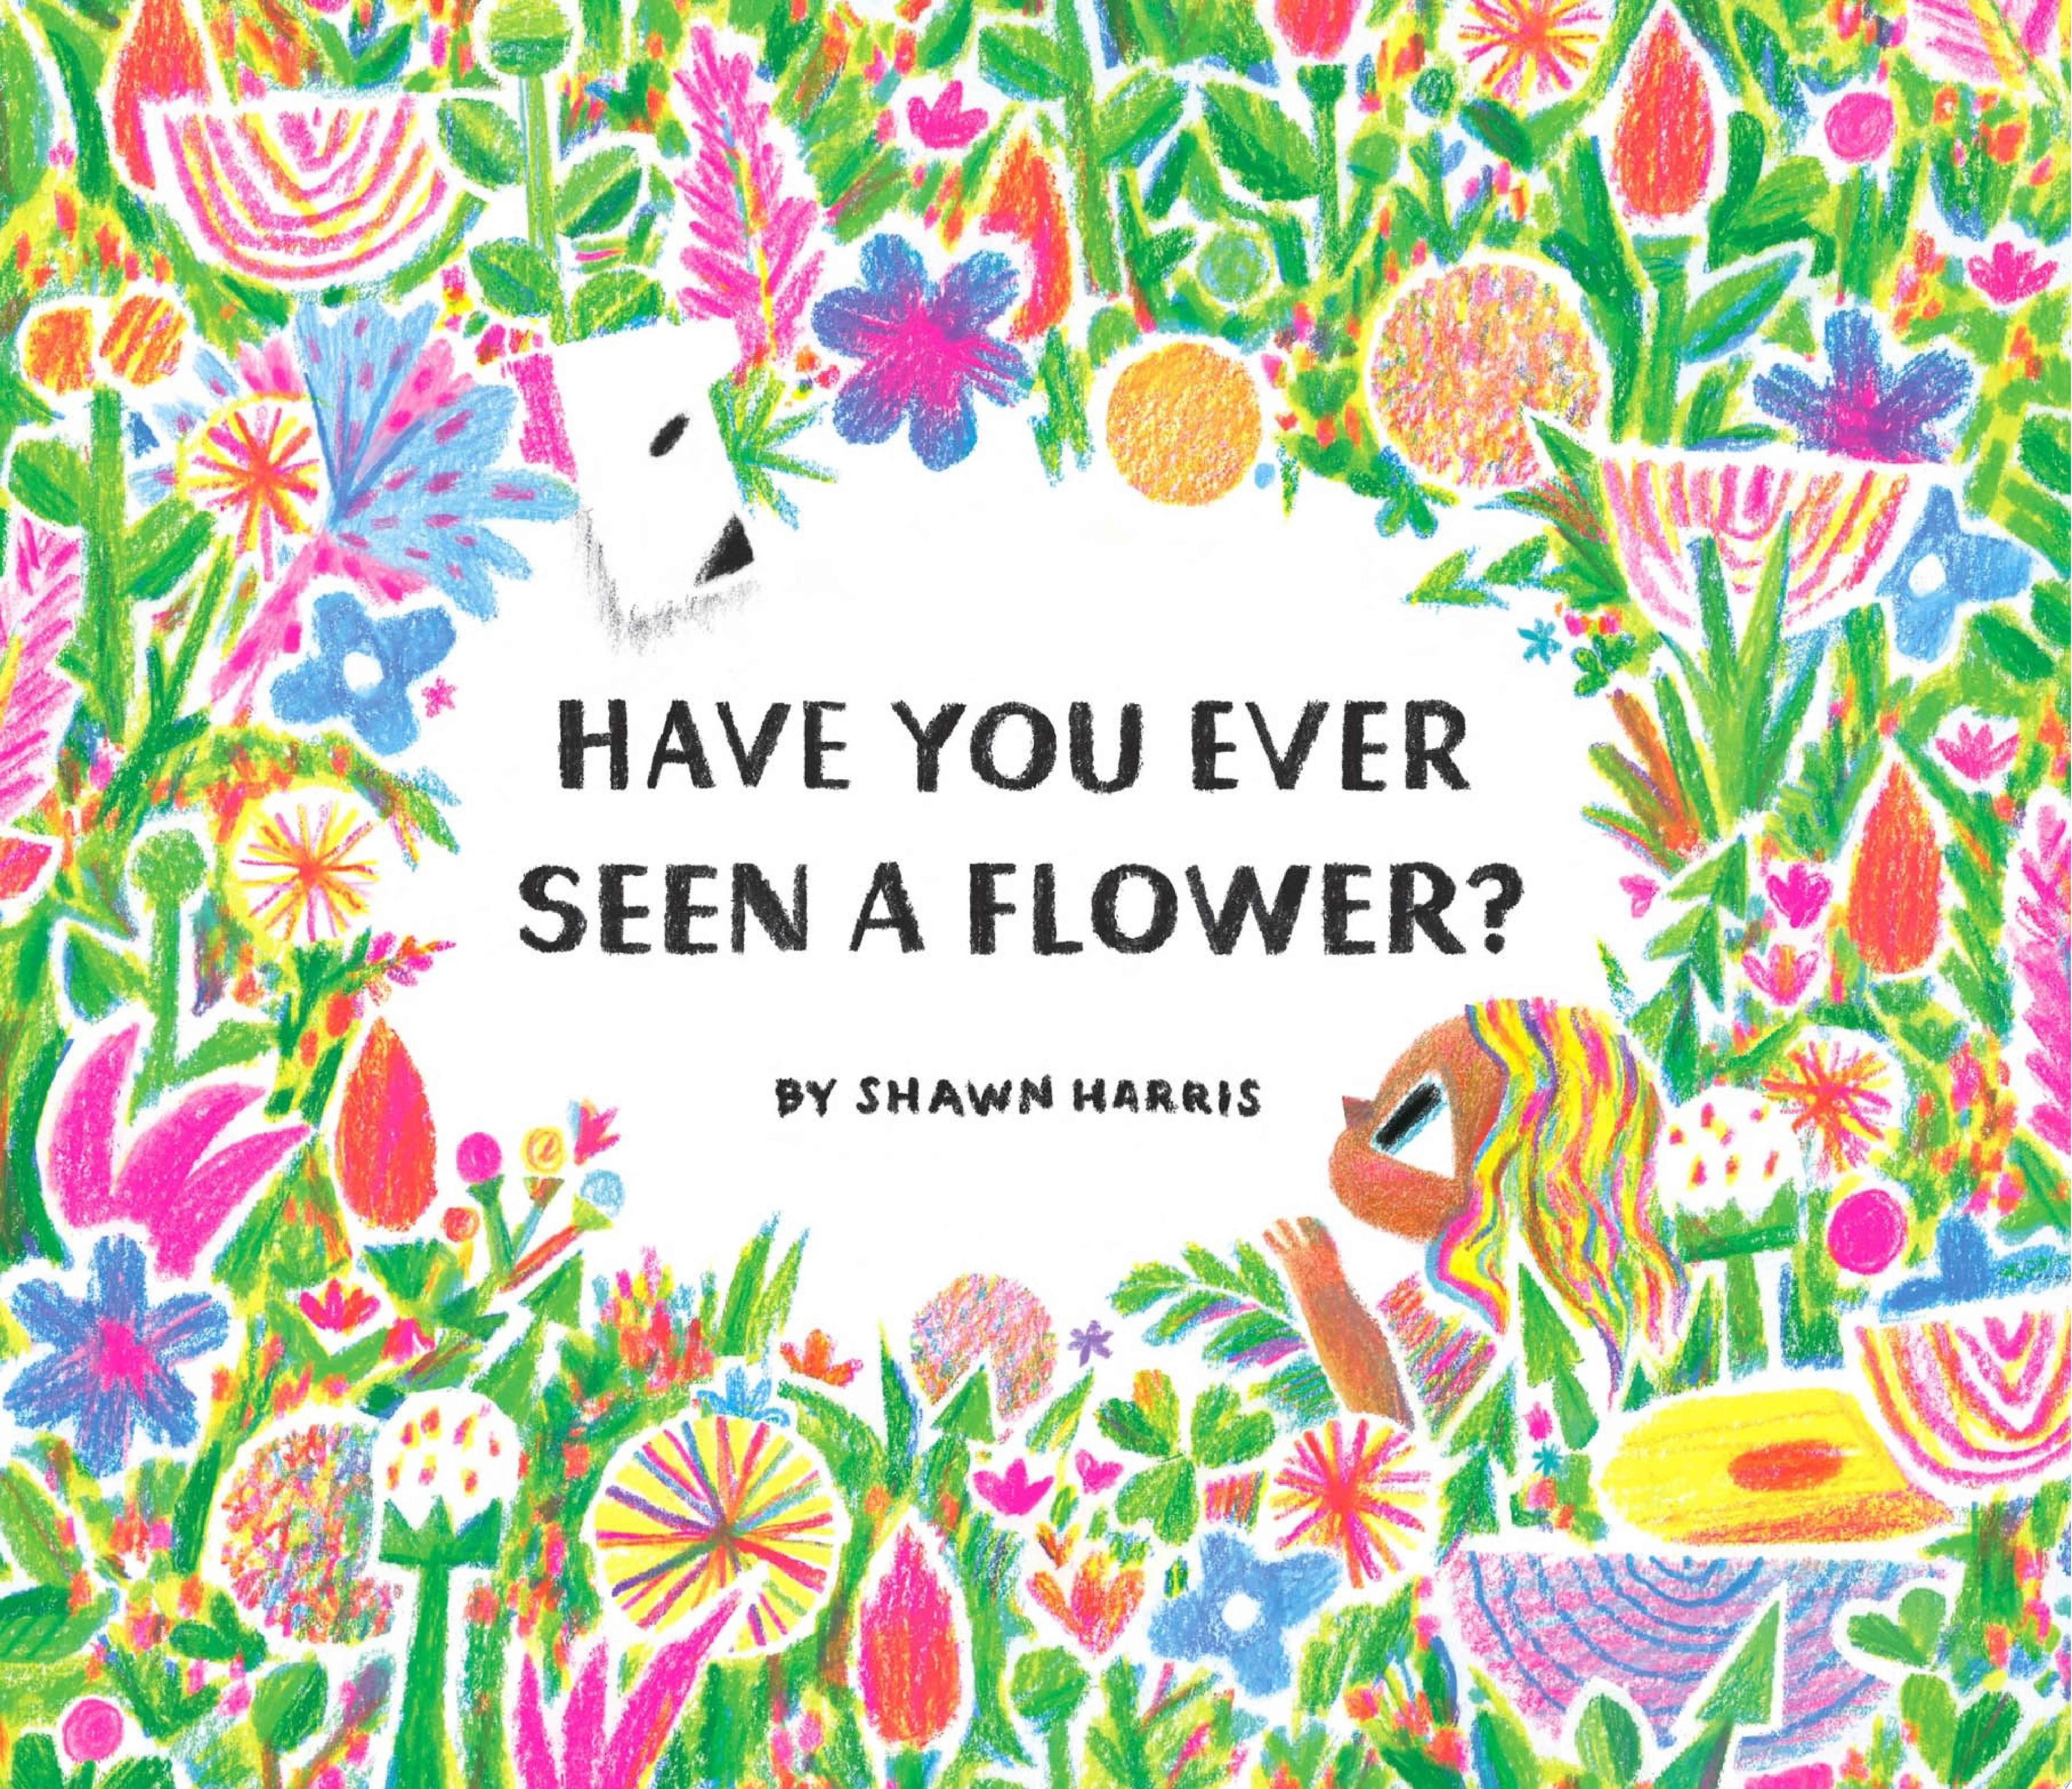 Image for "Have You Ever Seen a Flower?"